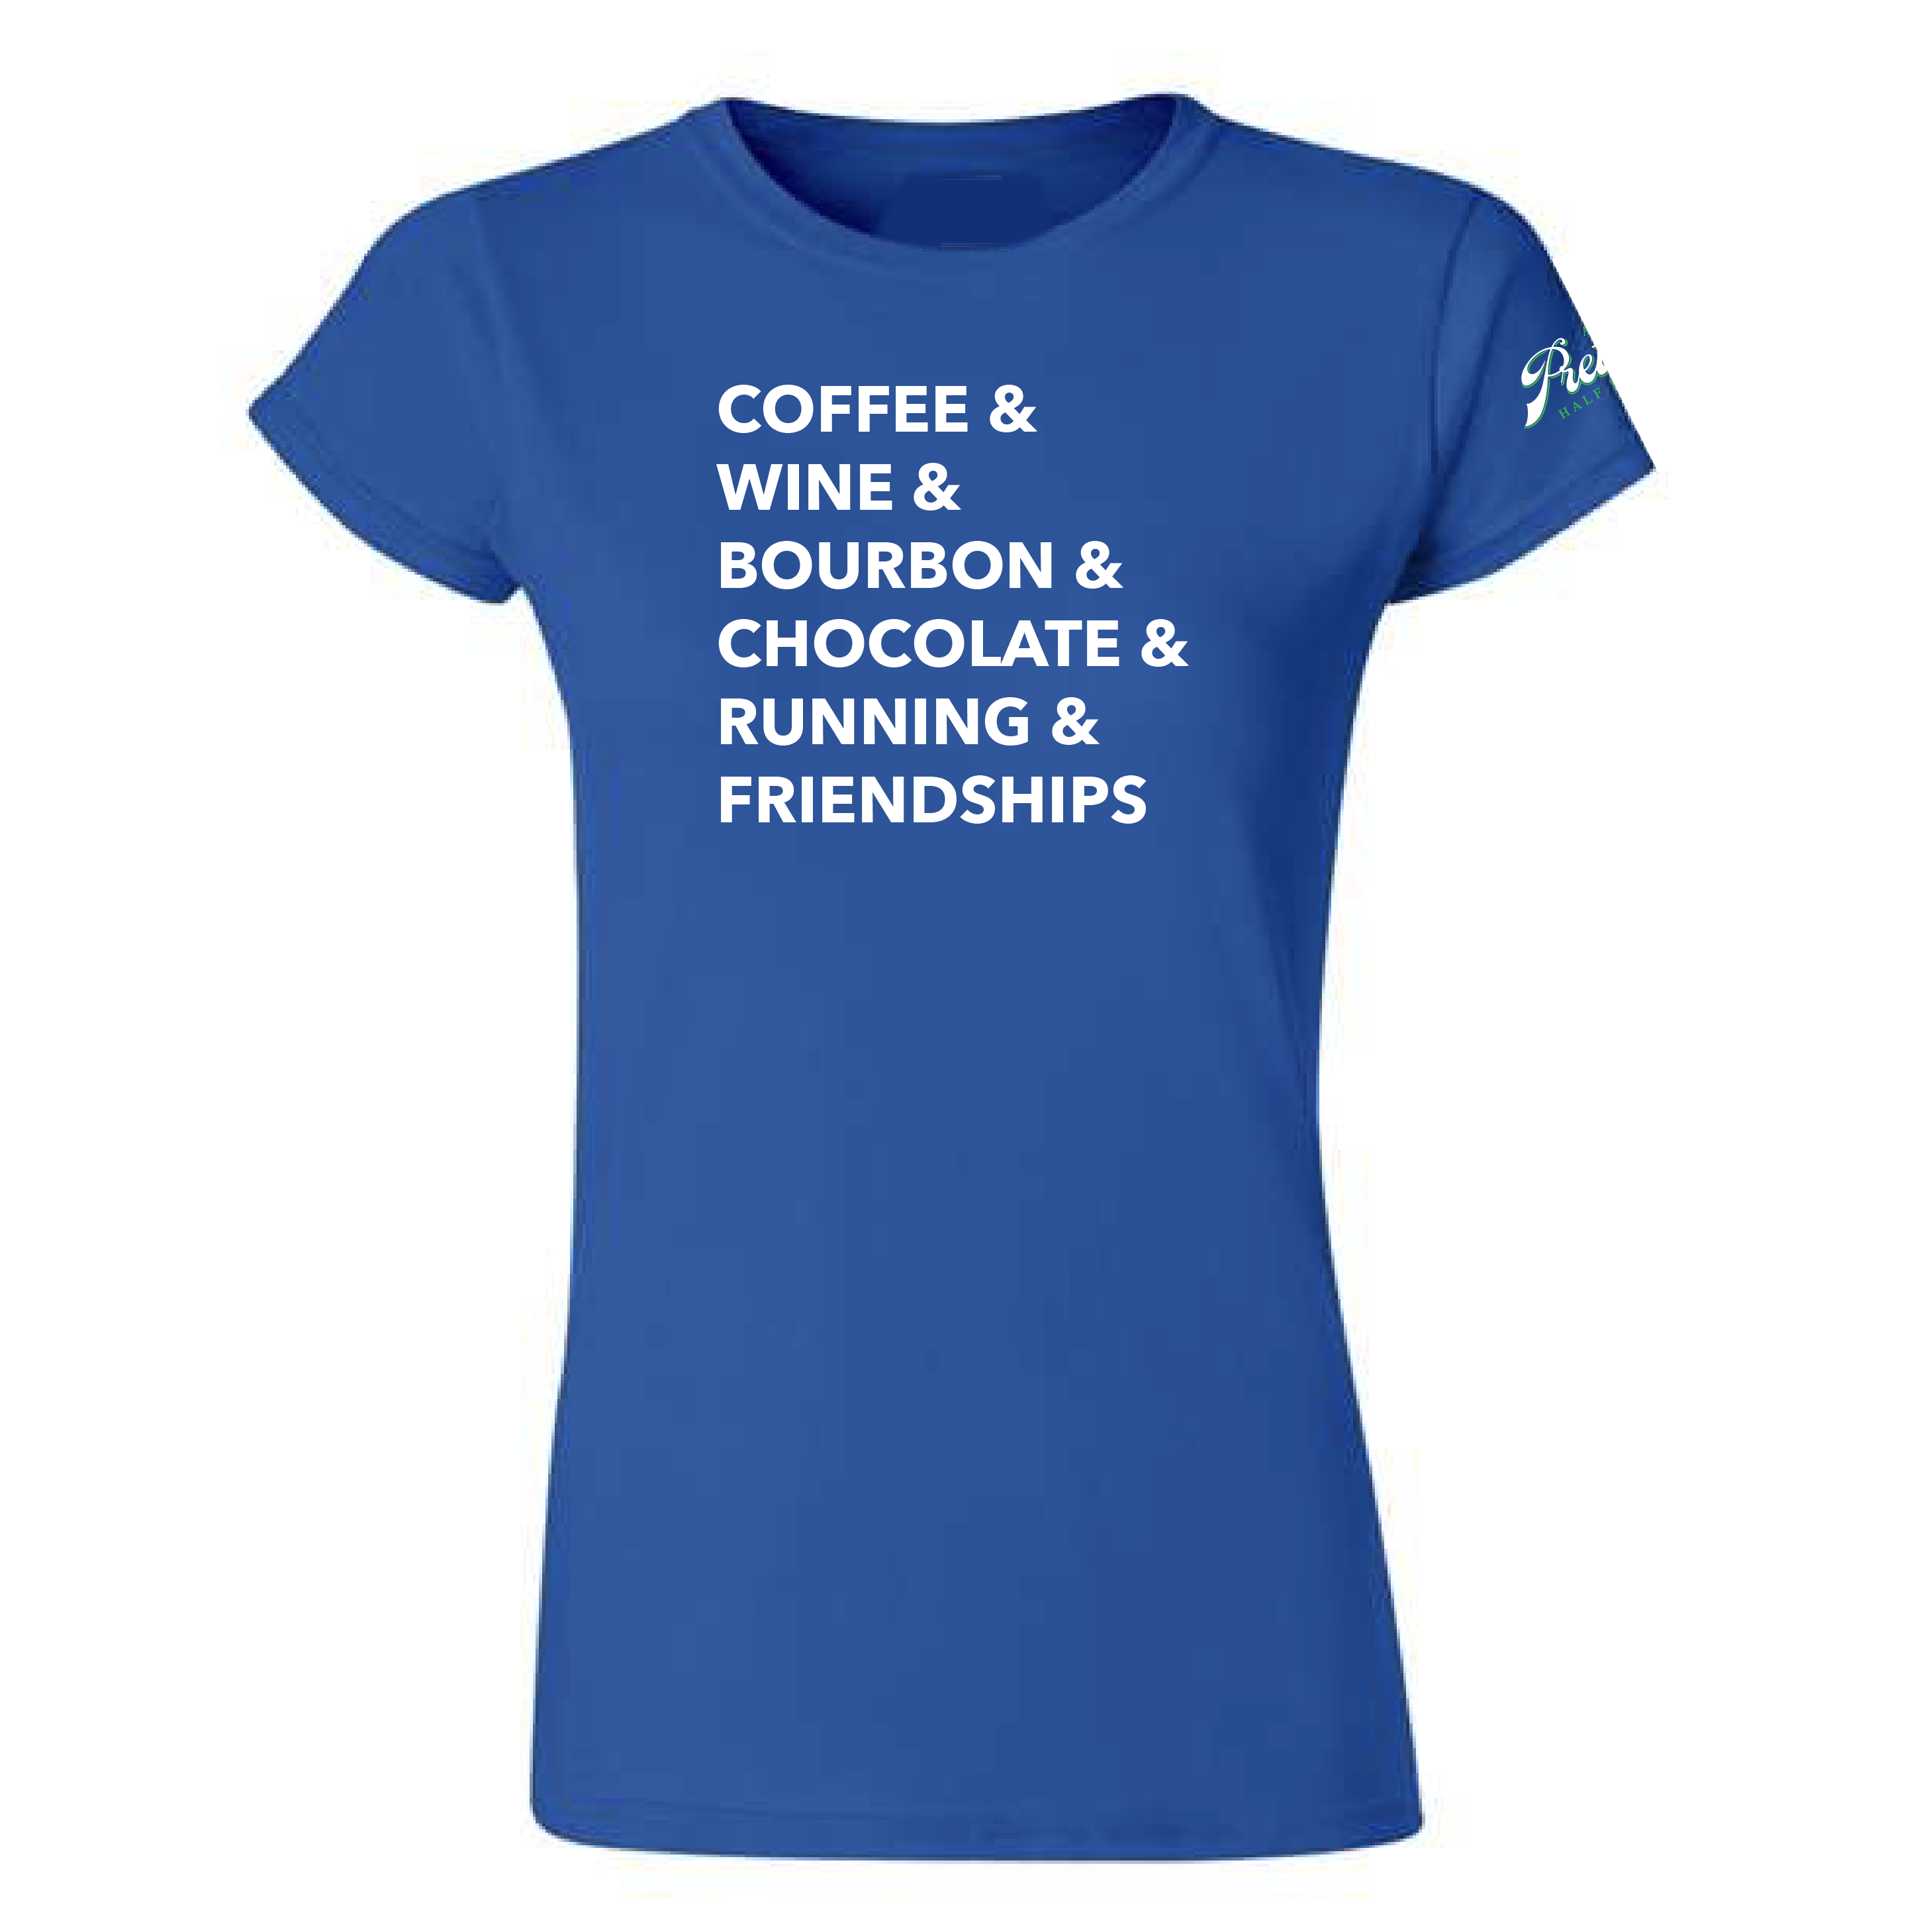 Women's Soft Tee in Royal Blue ("All The Things")